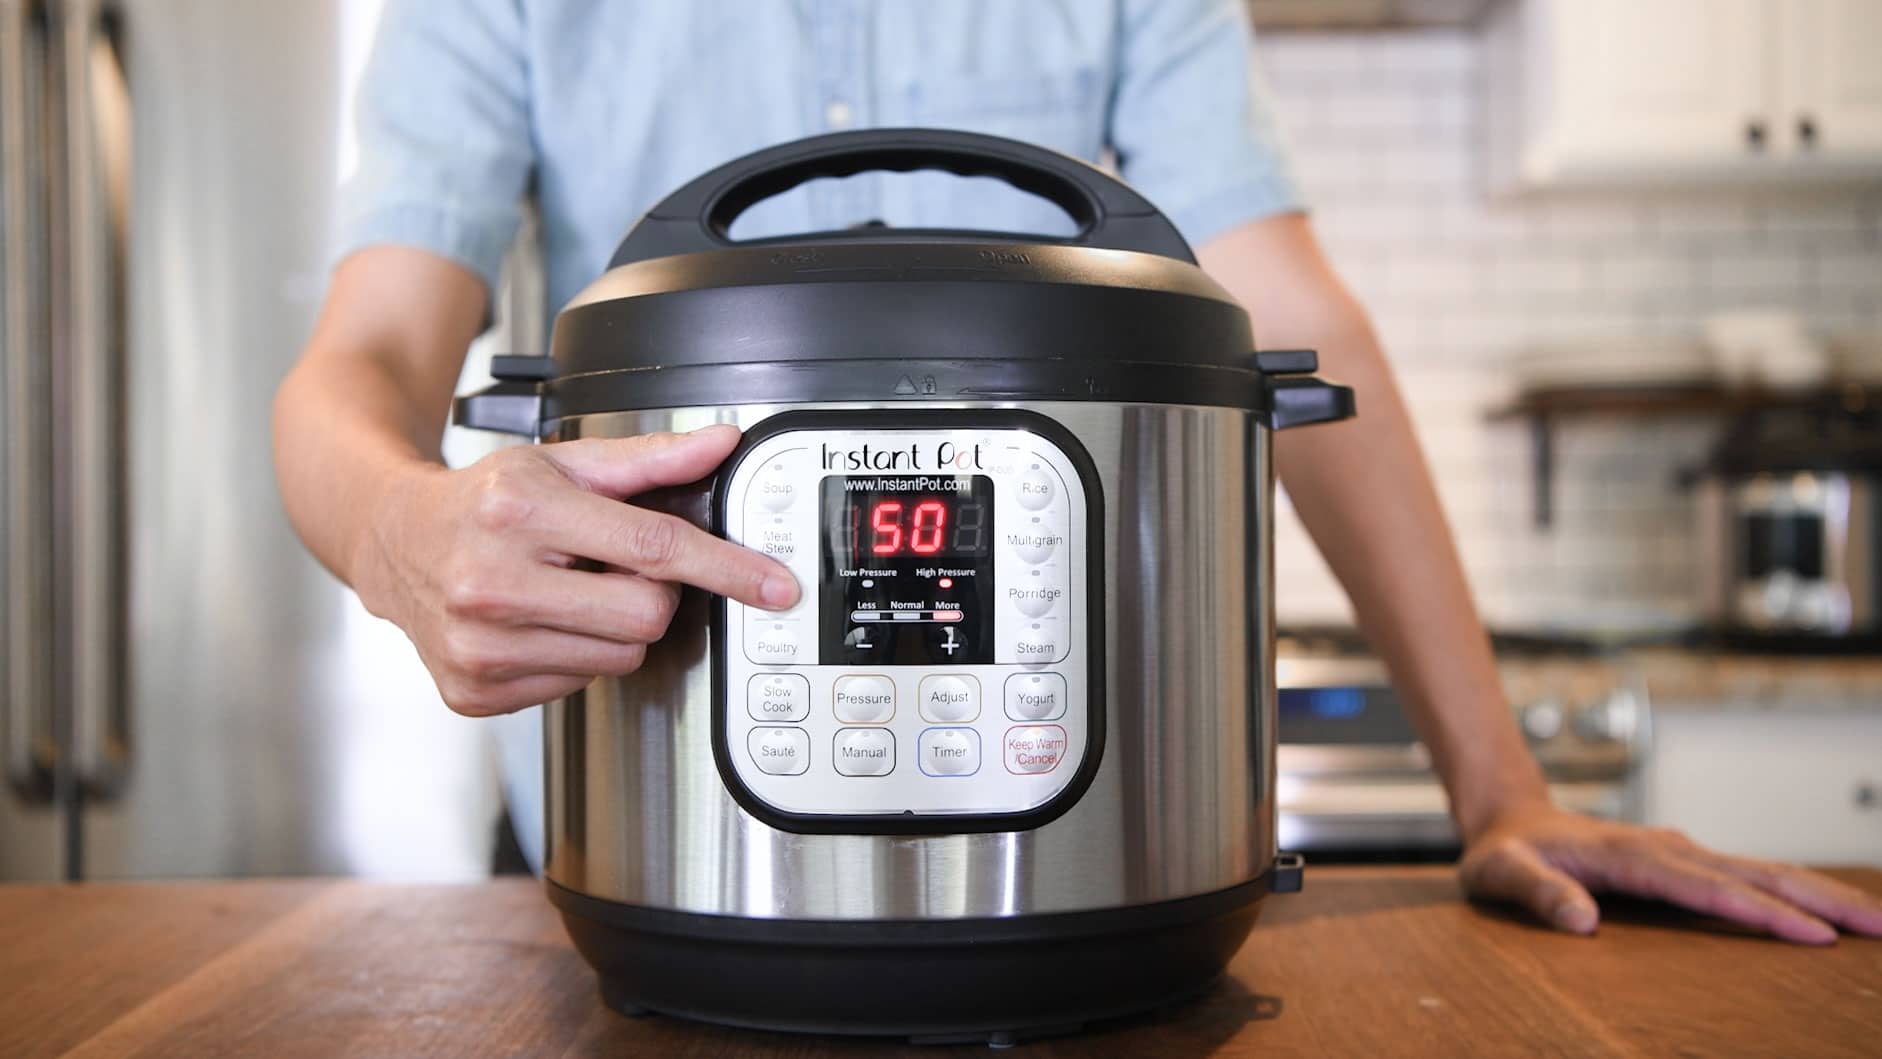 HOW TO USE INSTANT POT